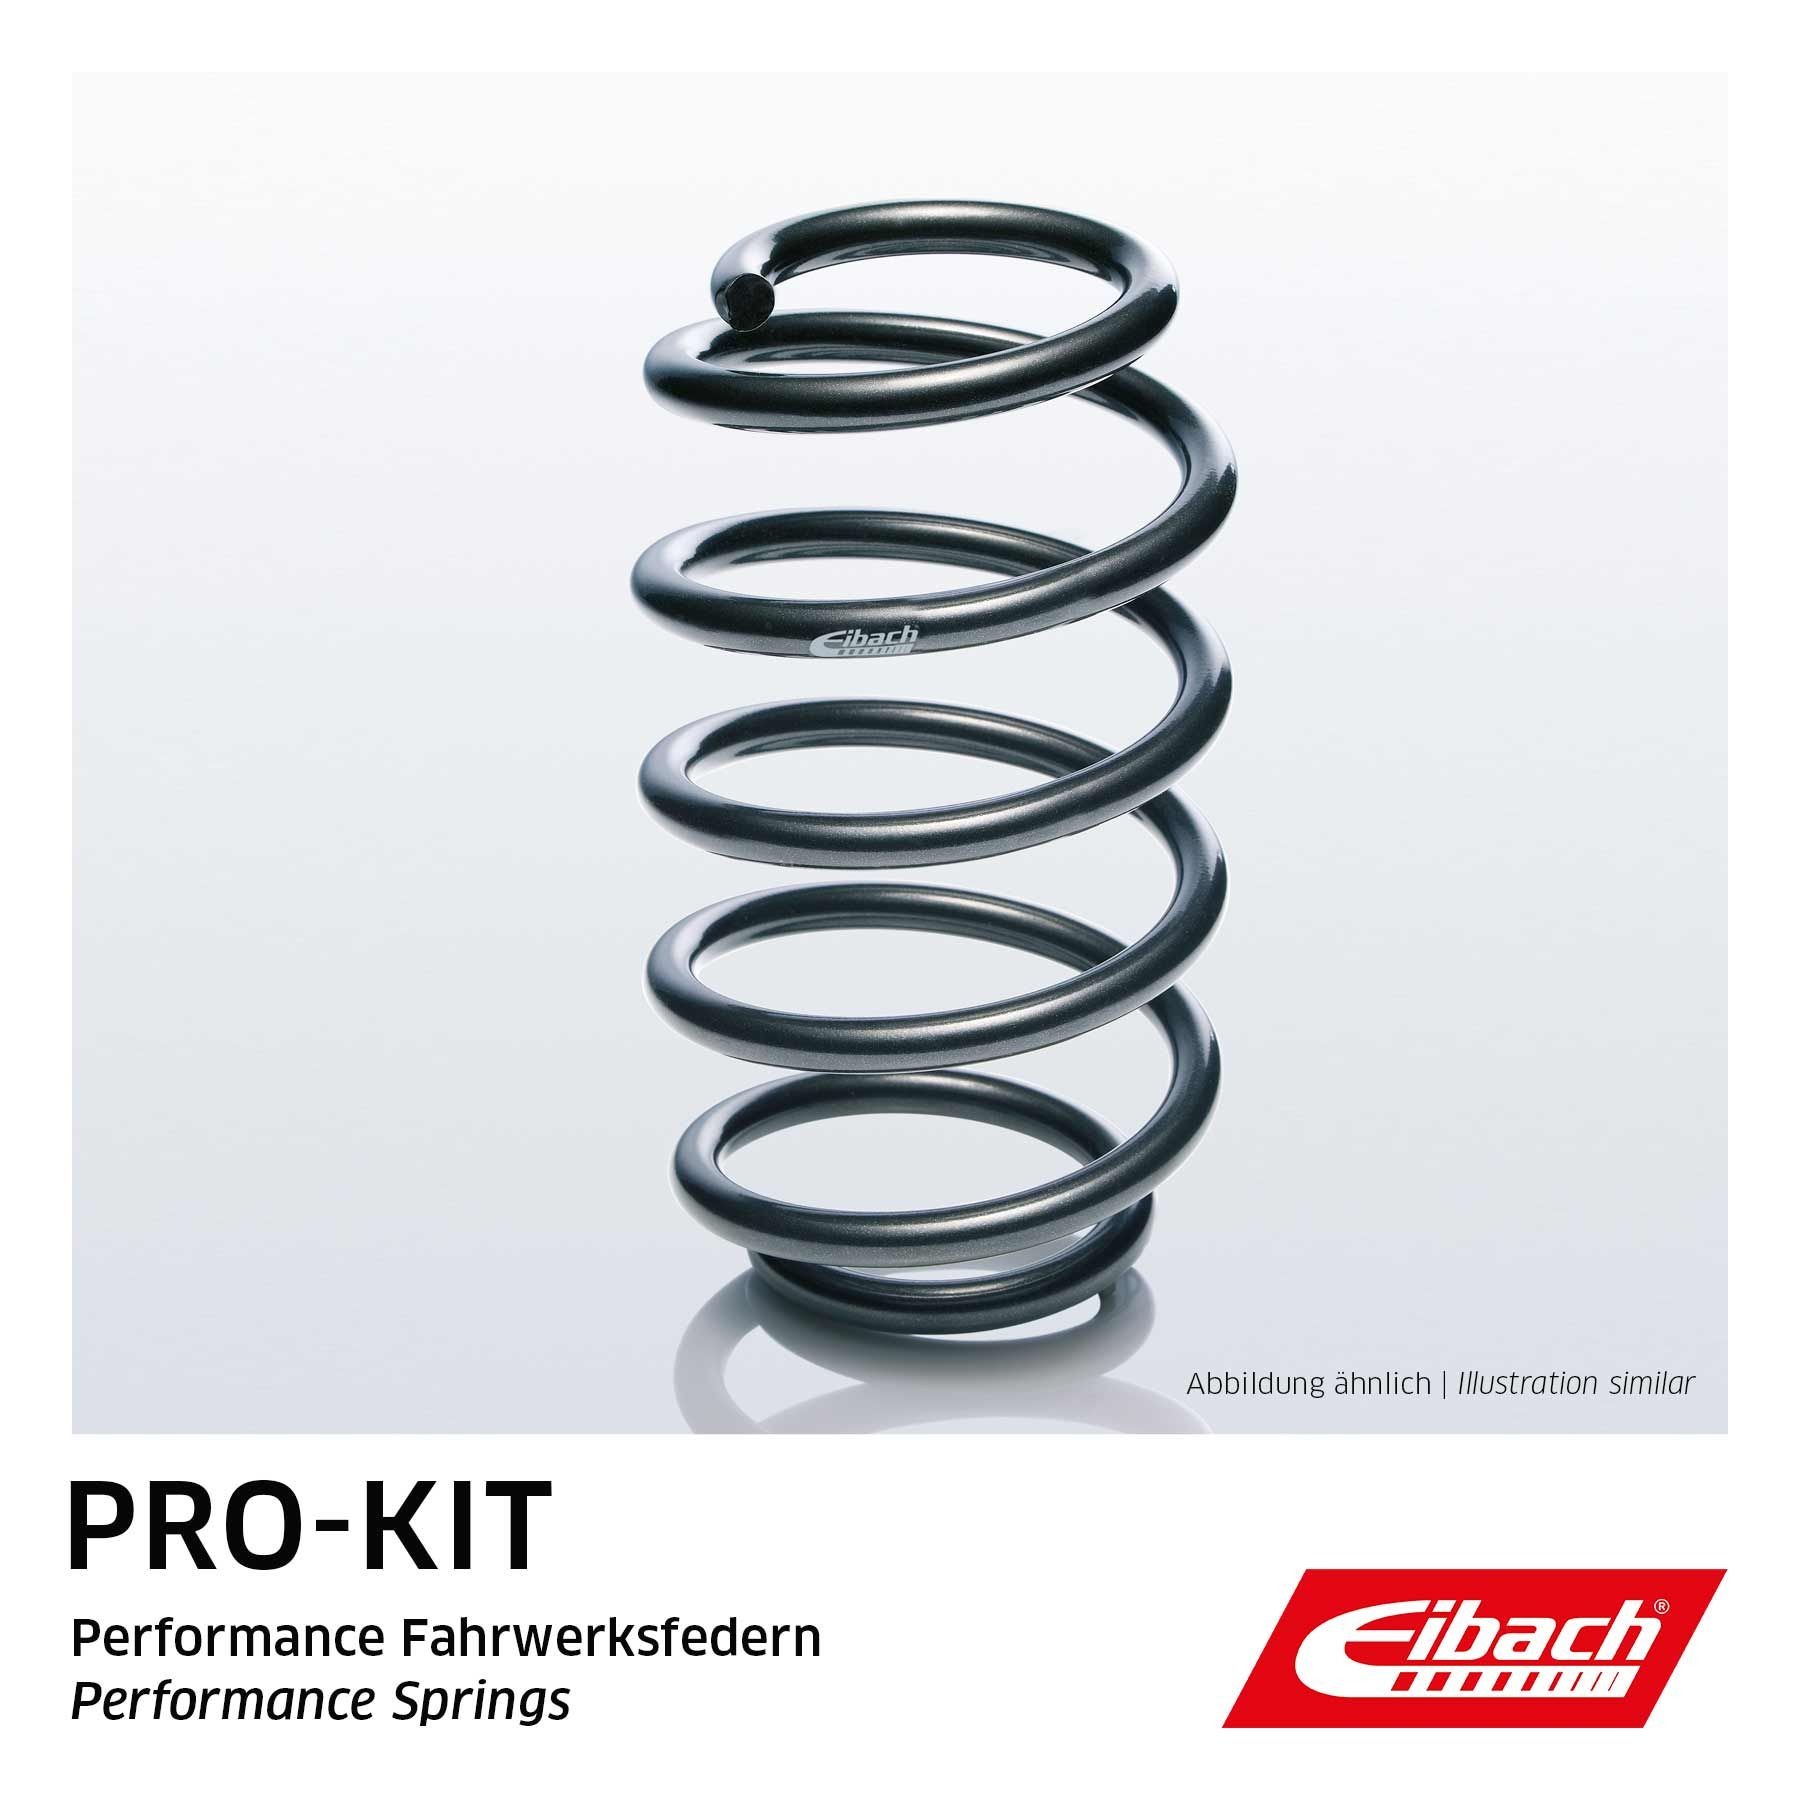 Continental Direct Focus MK2 Front Coil Springs x2 Pair 2004-2010 1.4,1.6 petrol hatchback 